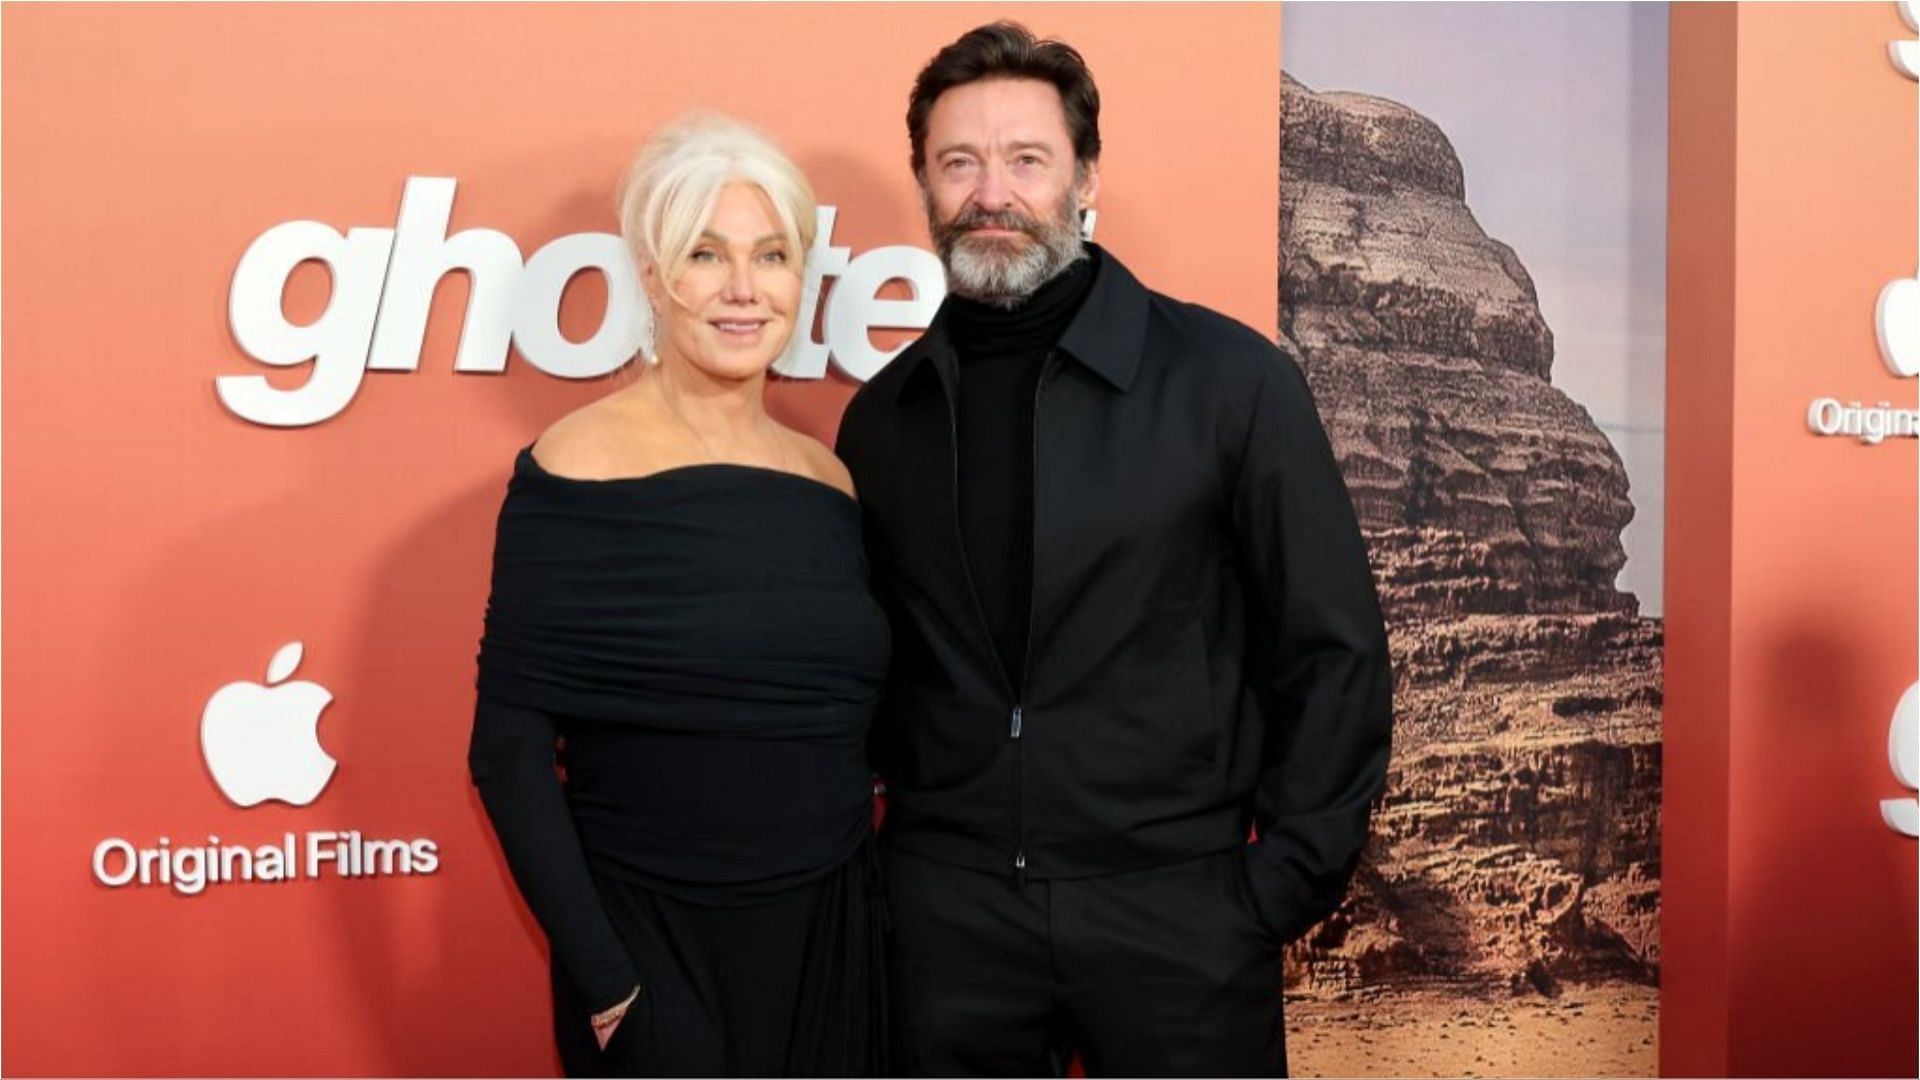 Hugh Jackman and Deborra-Lee Furness did not have any biological children over the years (Image via Cindy Ord/Getty Images)